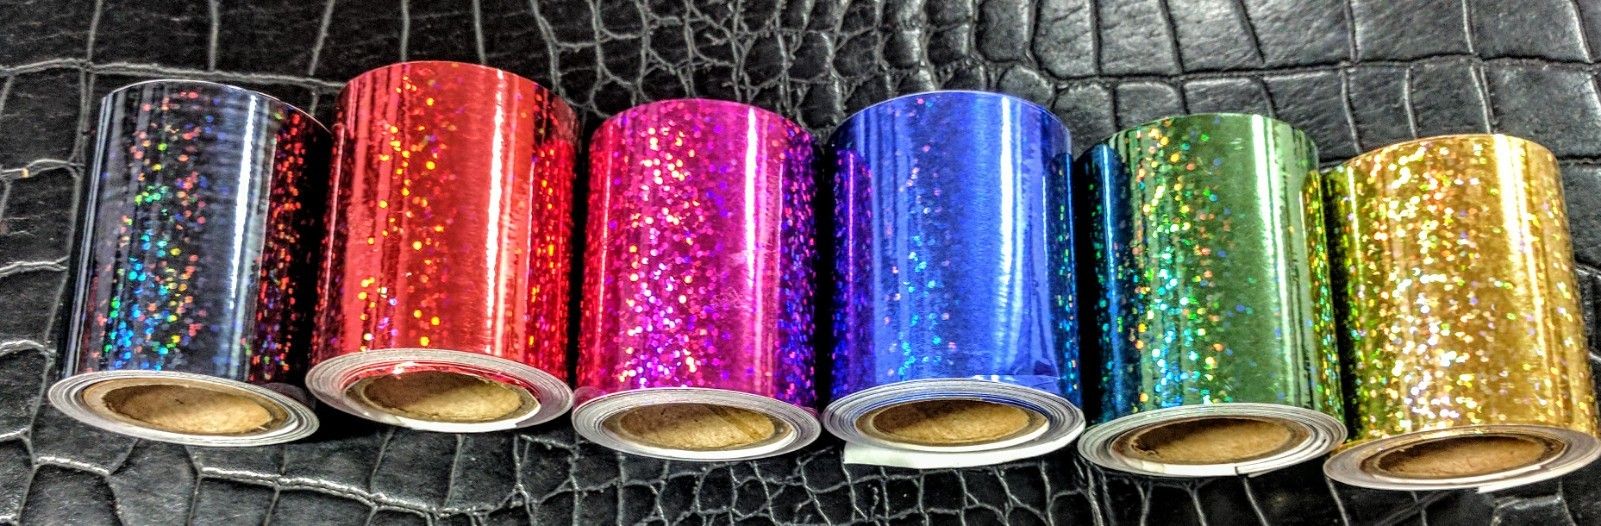 Holographic  fancy fish lure hula hoop tapes